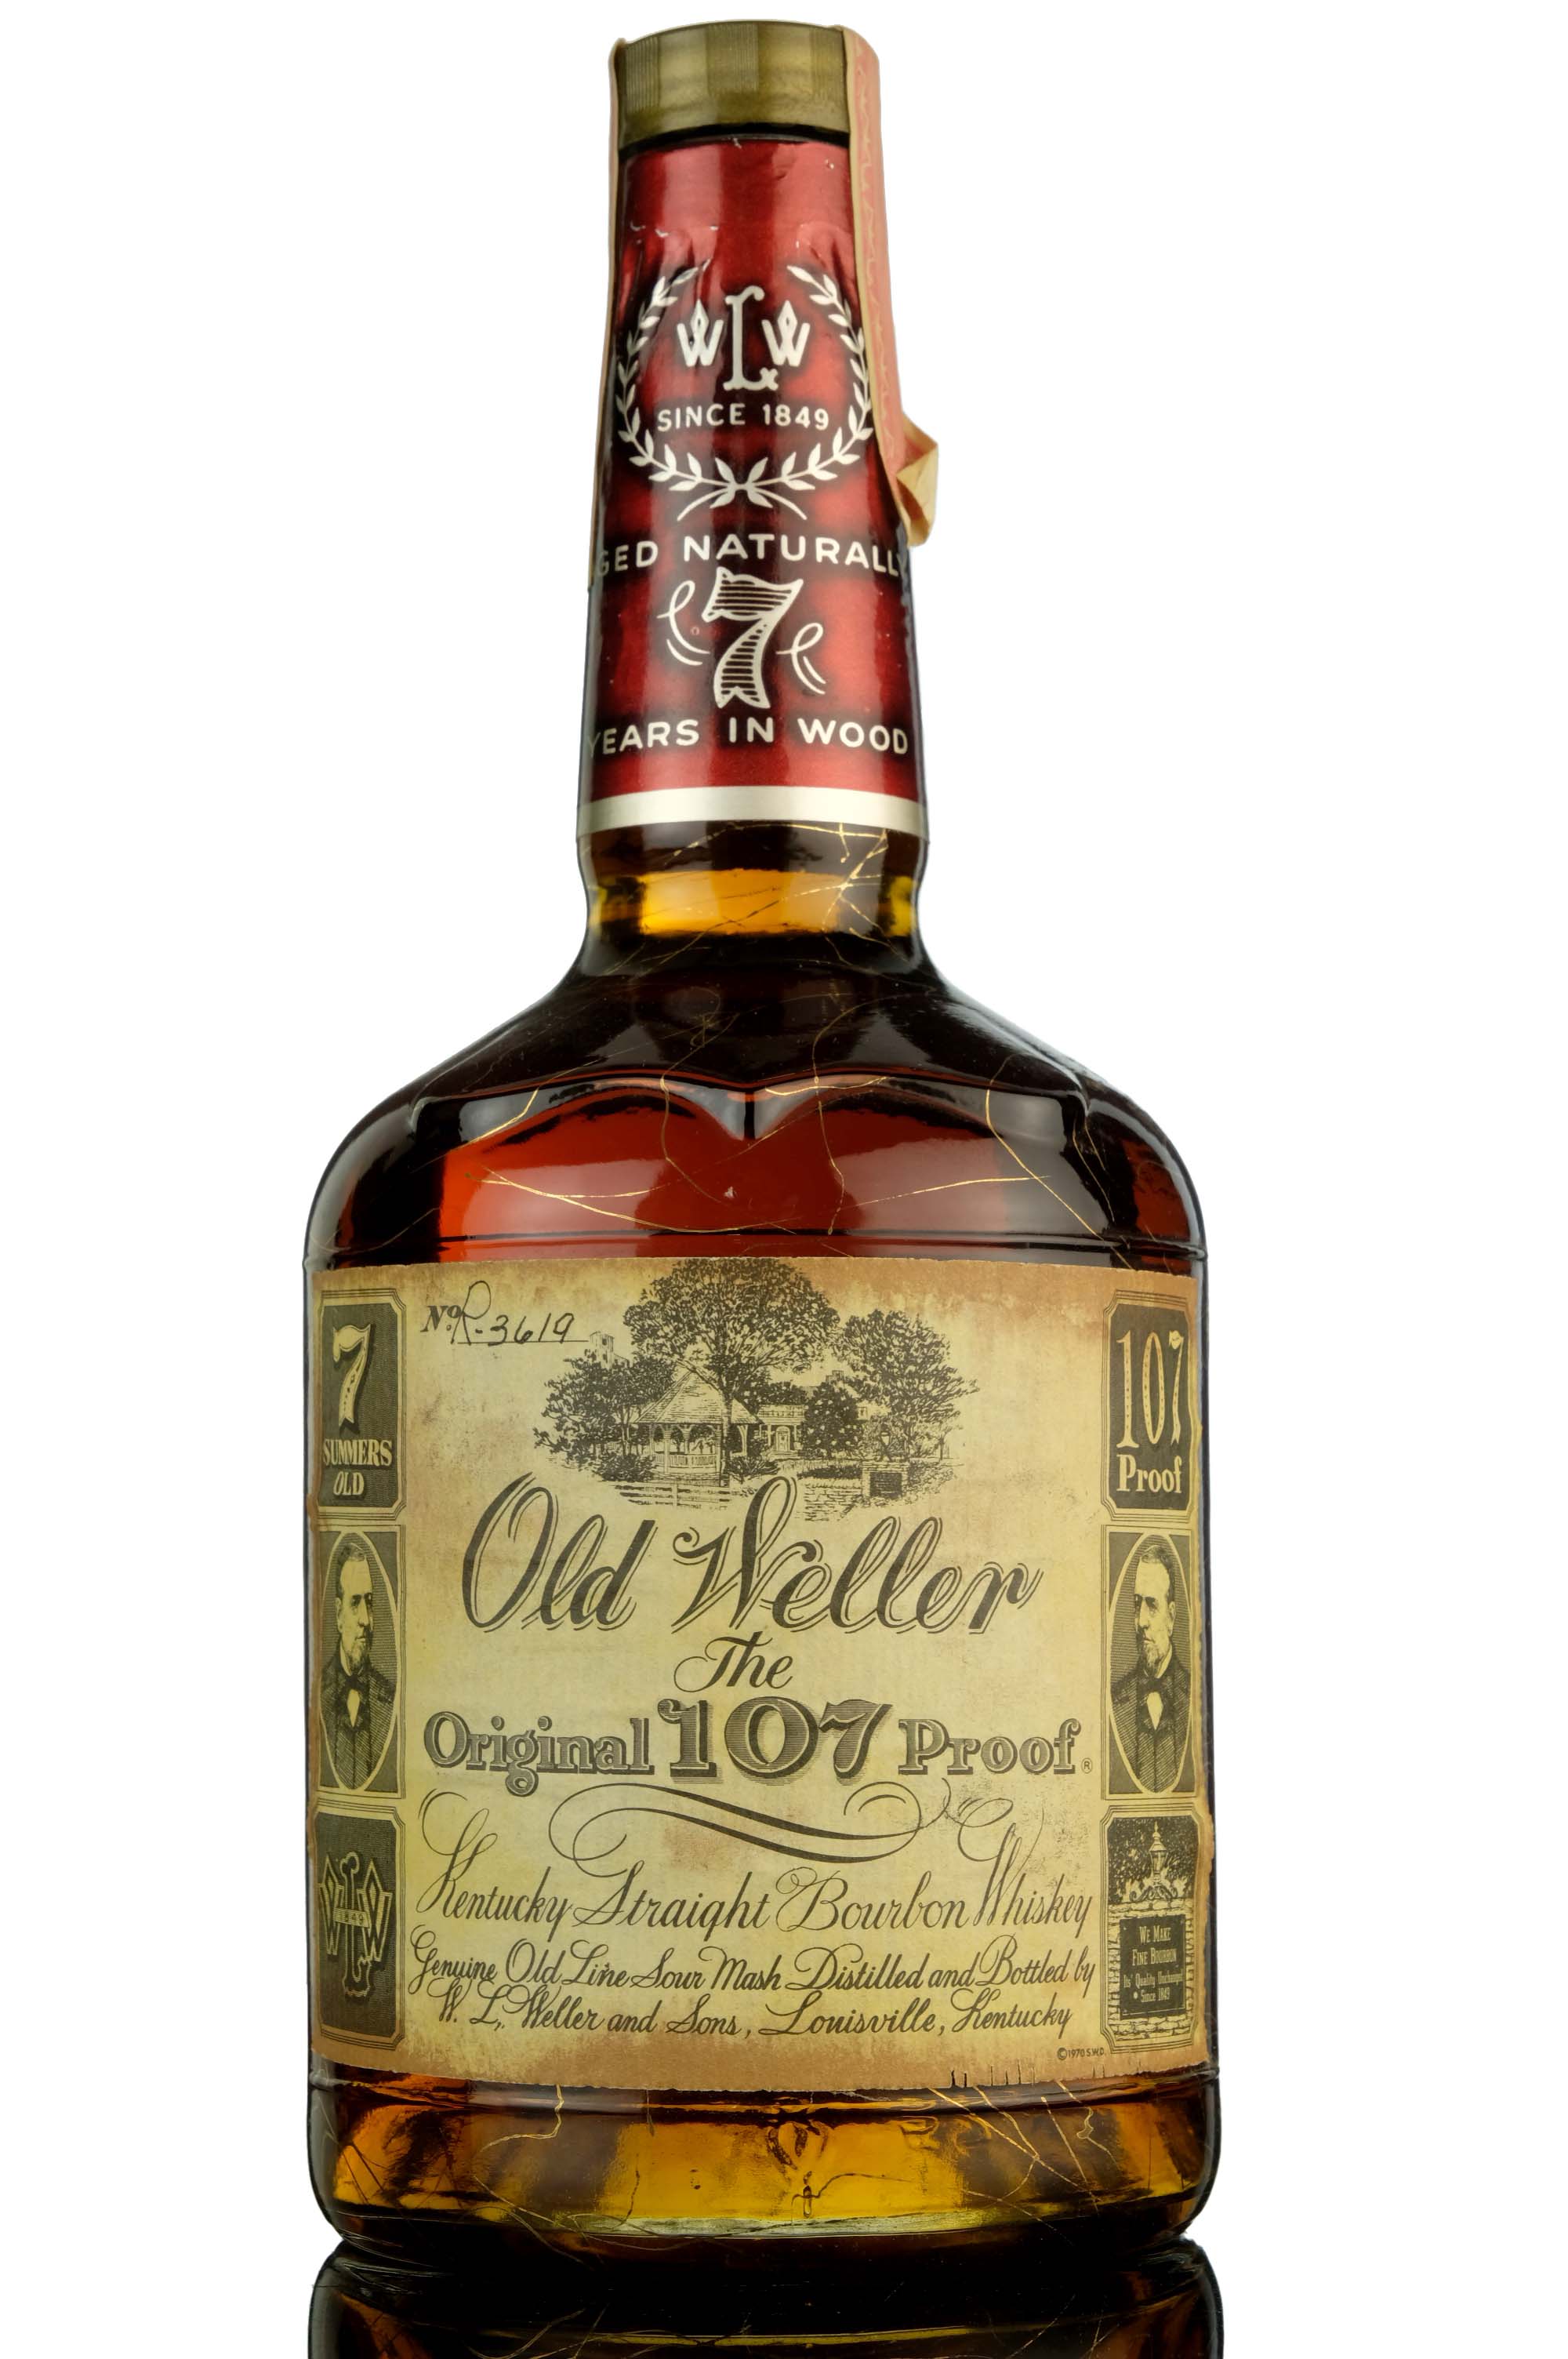 Old Weller 7 Year Old - The Original 107 Proof - 1985 Release